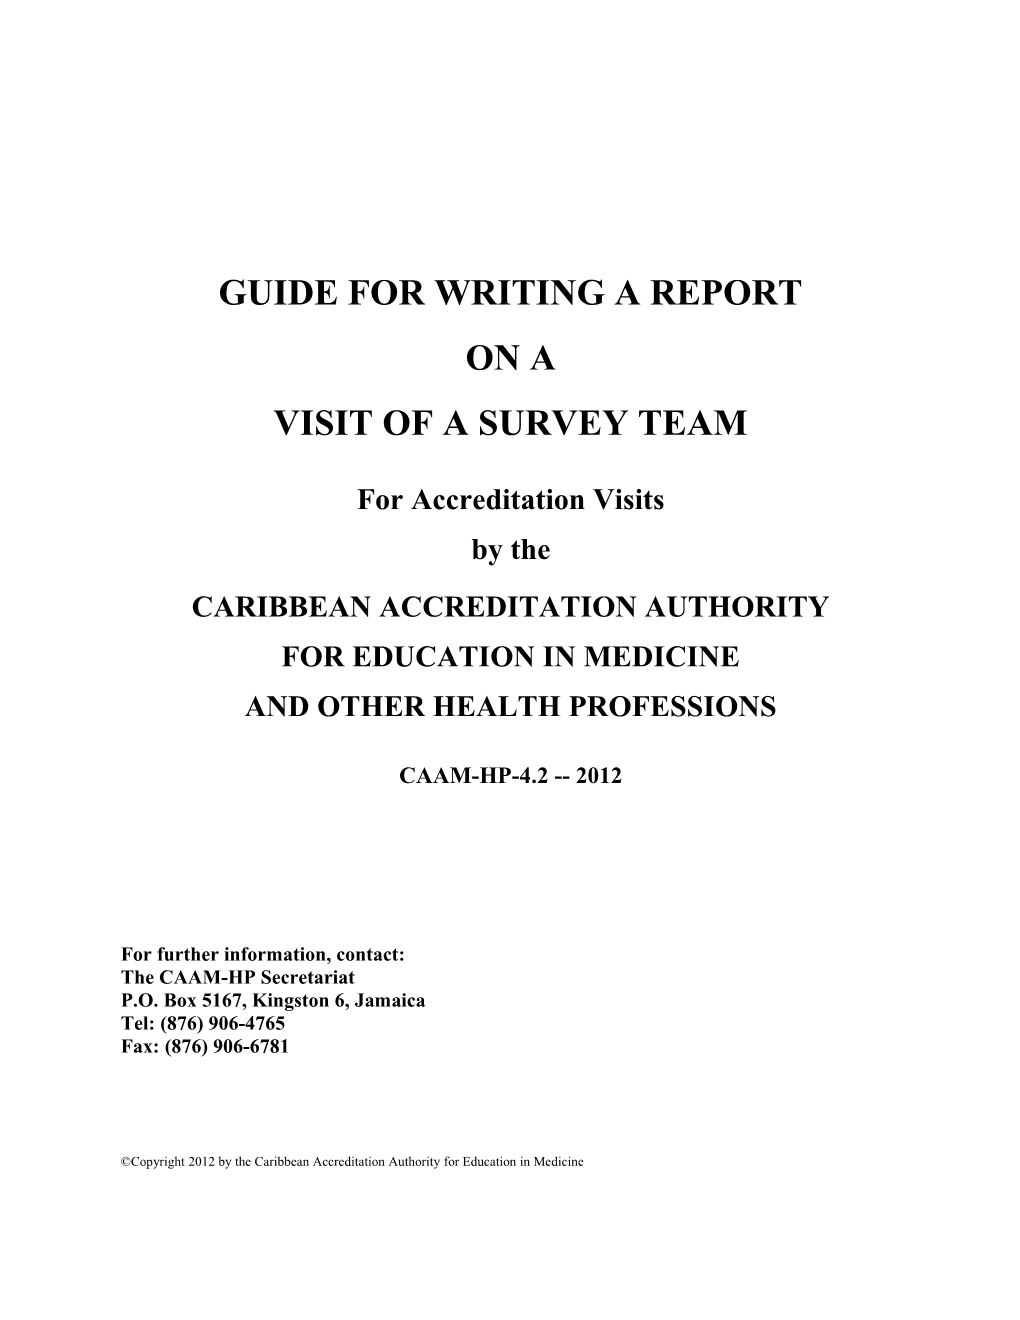 Guide for Writing a Report